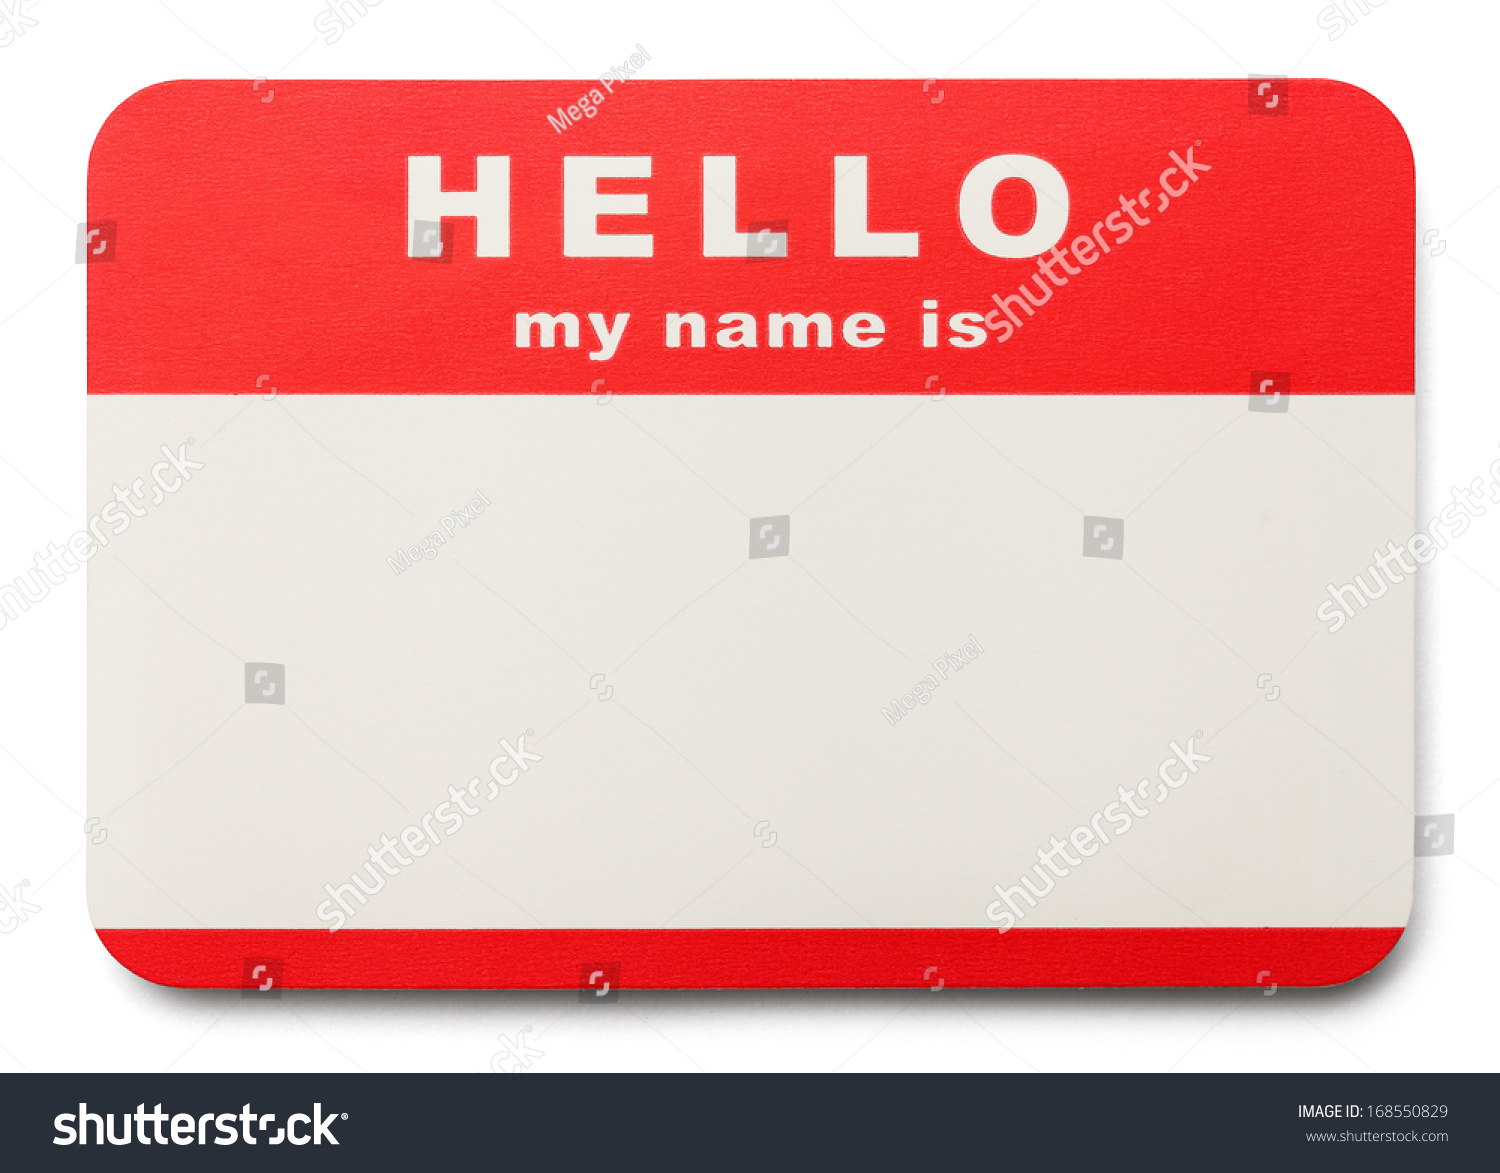 Red Hello My Name Is Tag with Copy Space, Isolated on White Background. #168550829